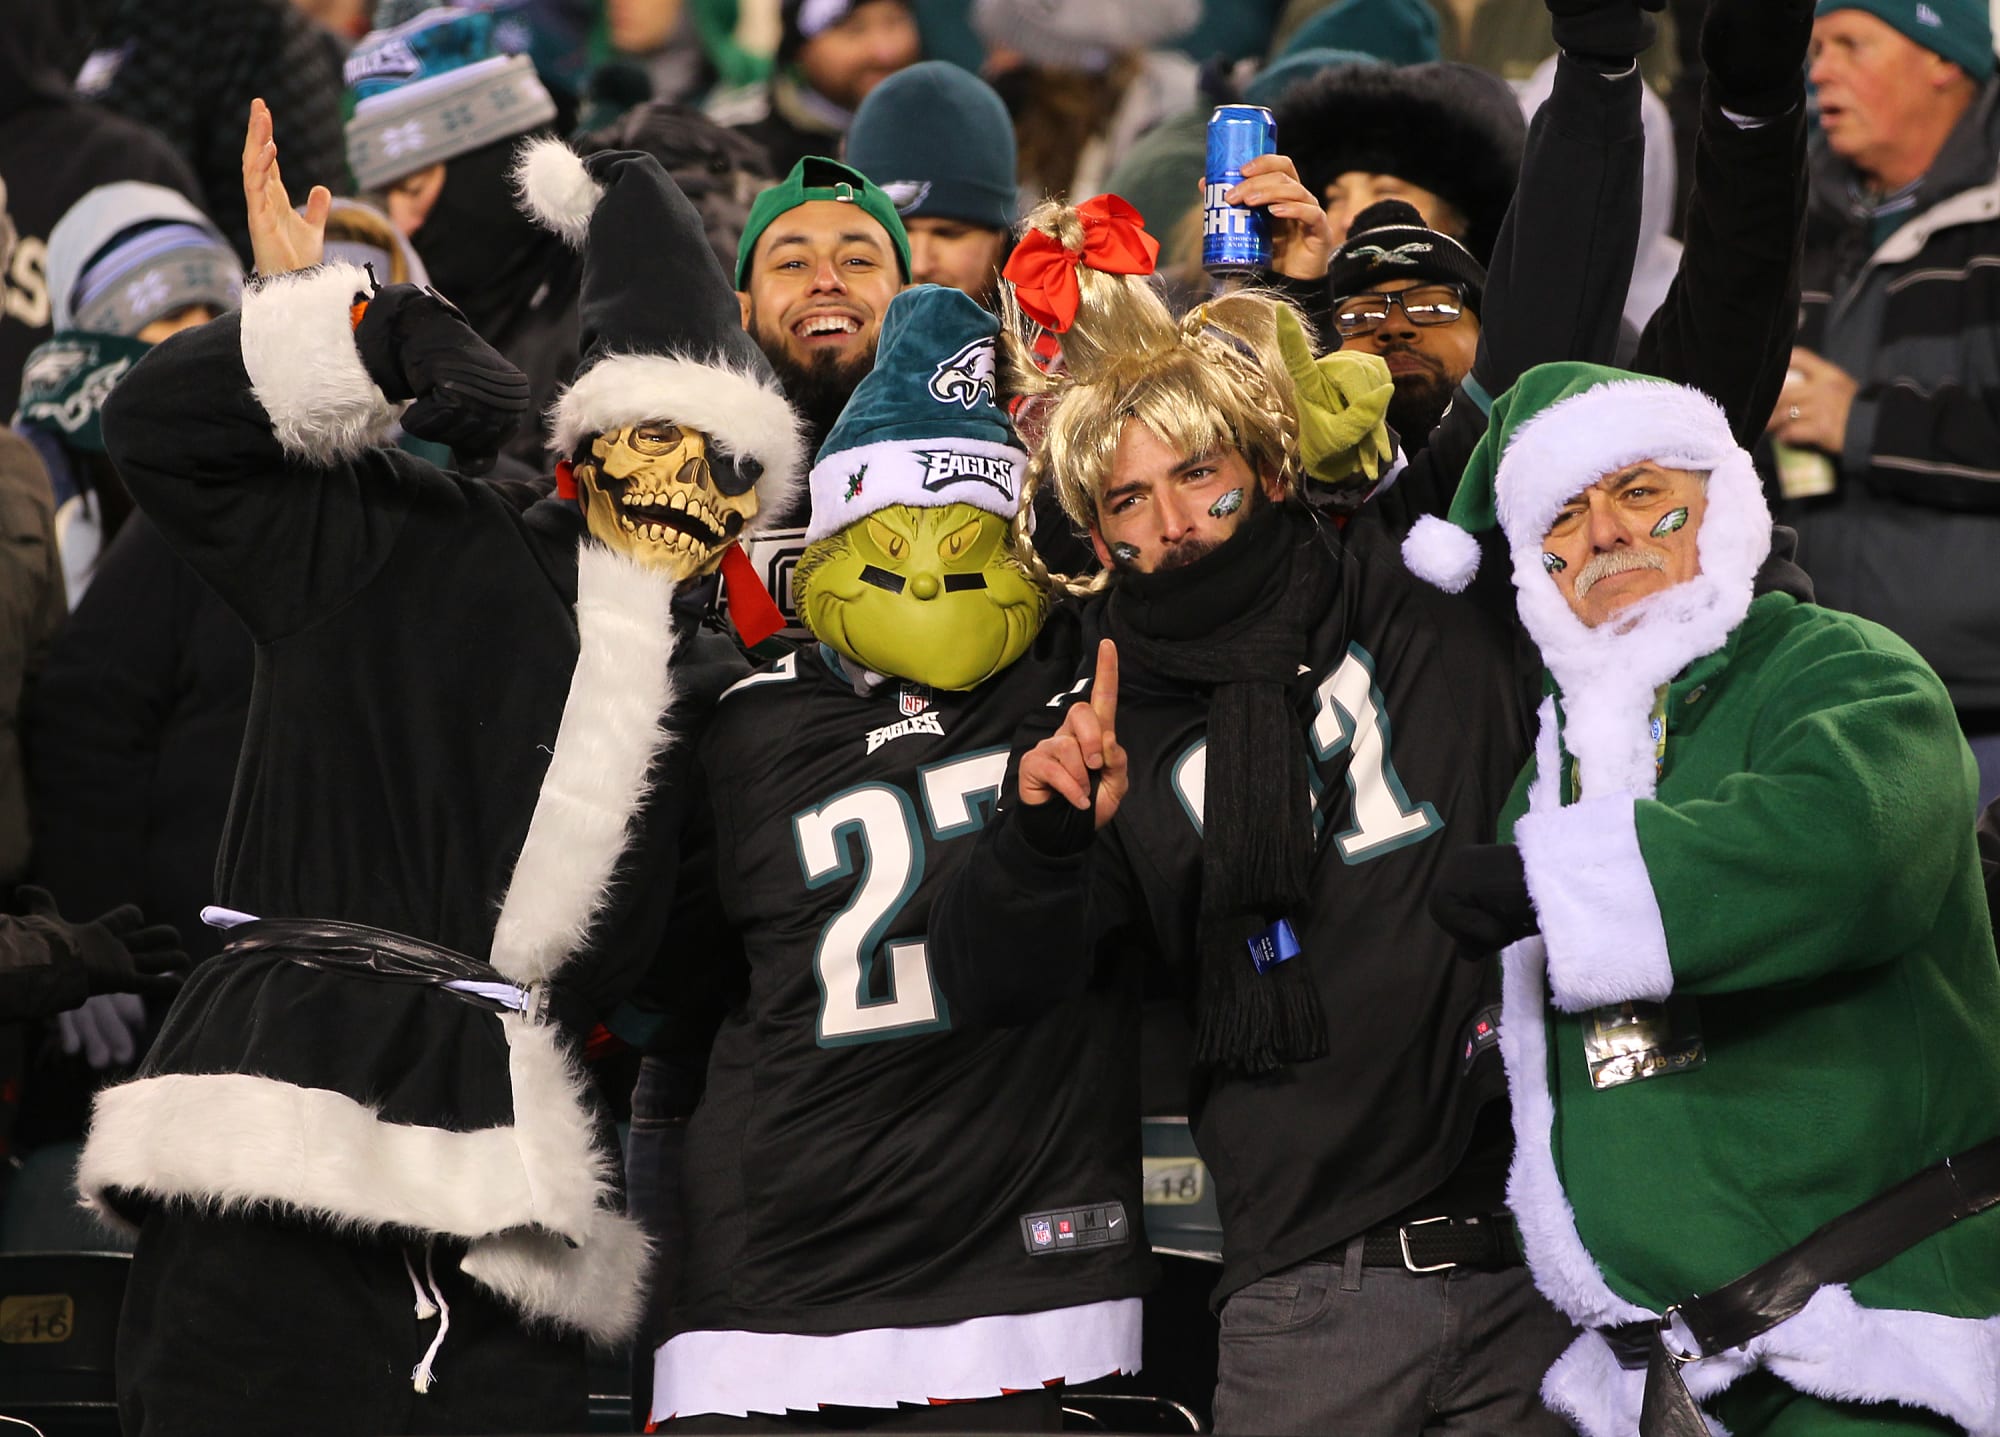 Great Christmas tweets from current and former Philadelphia Eagles